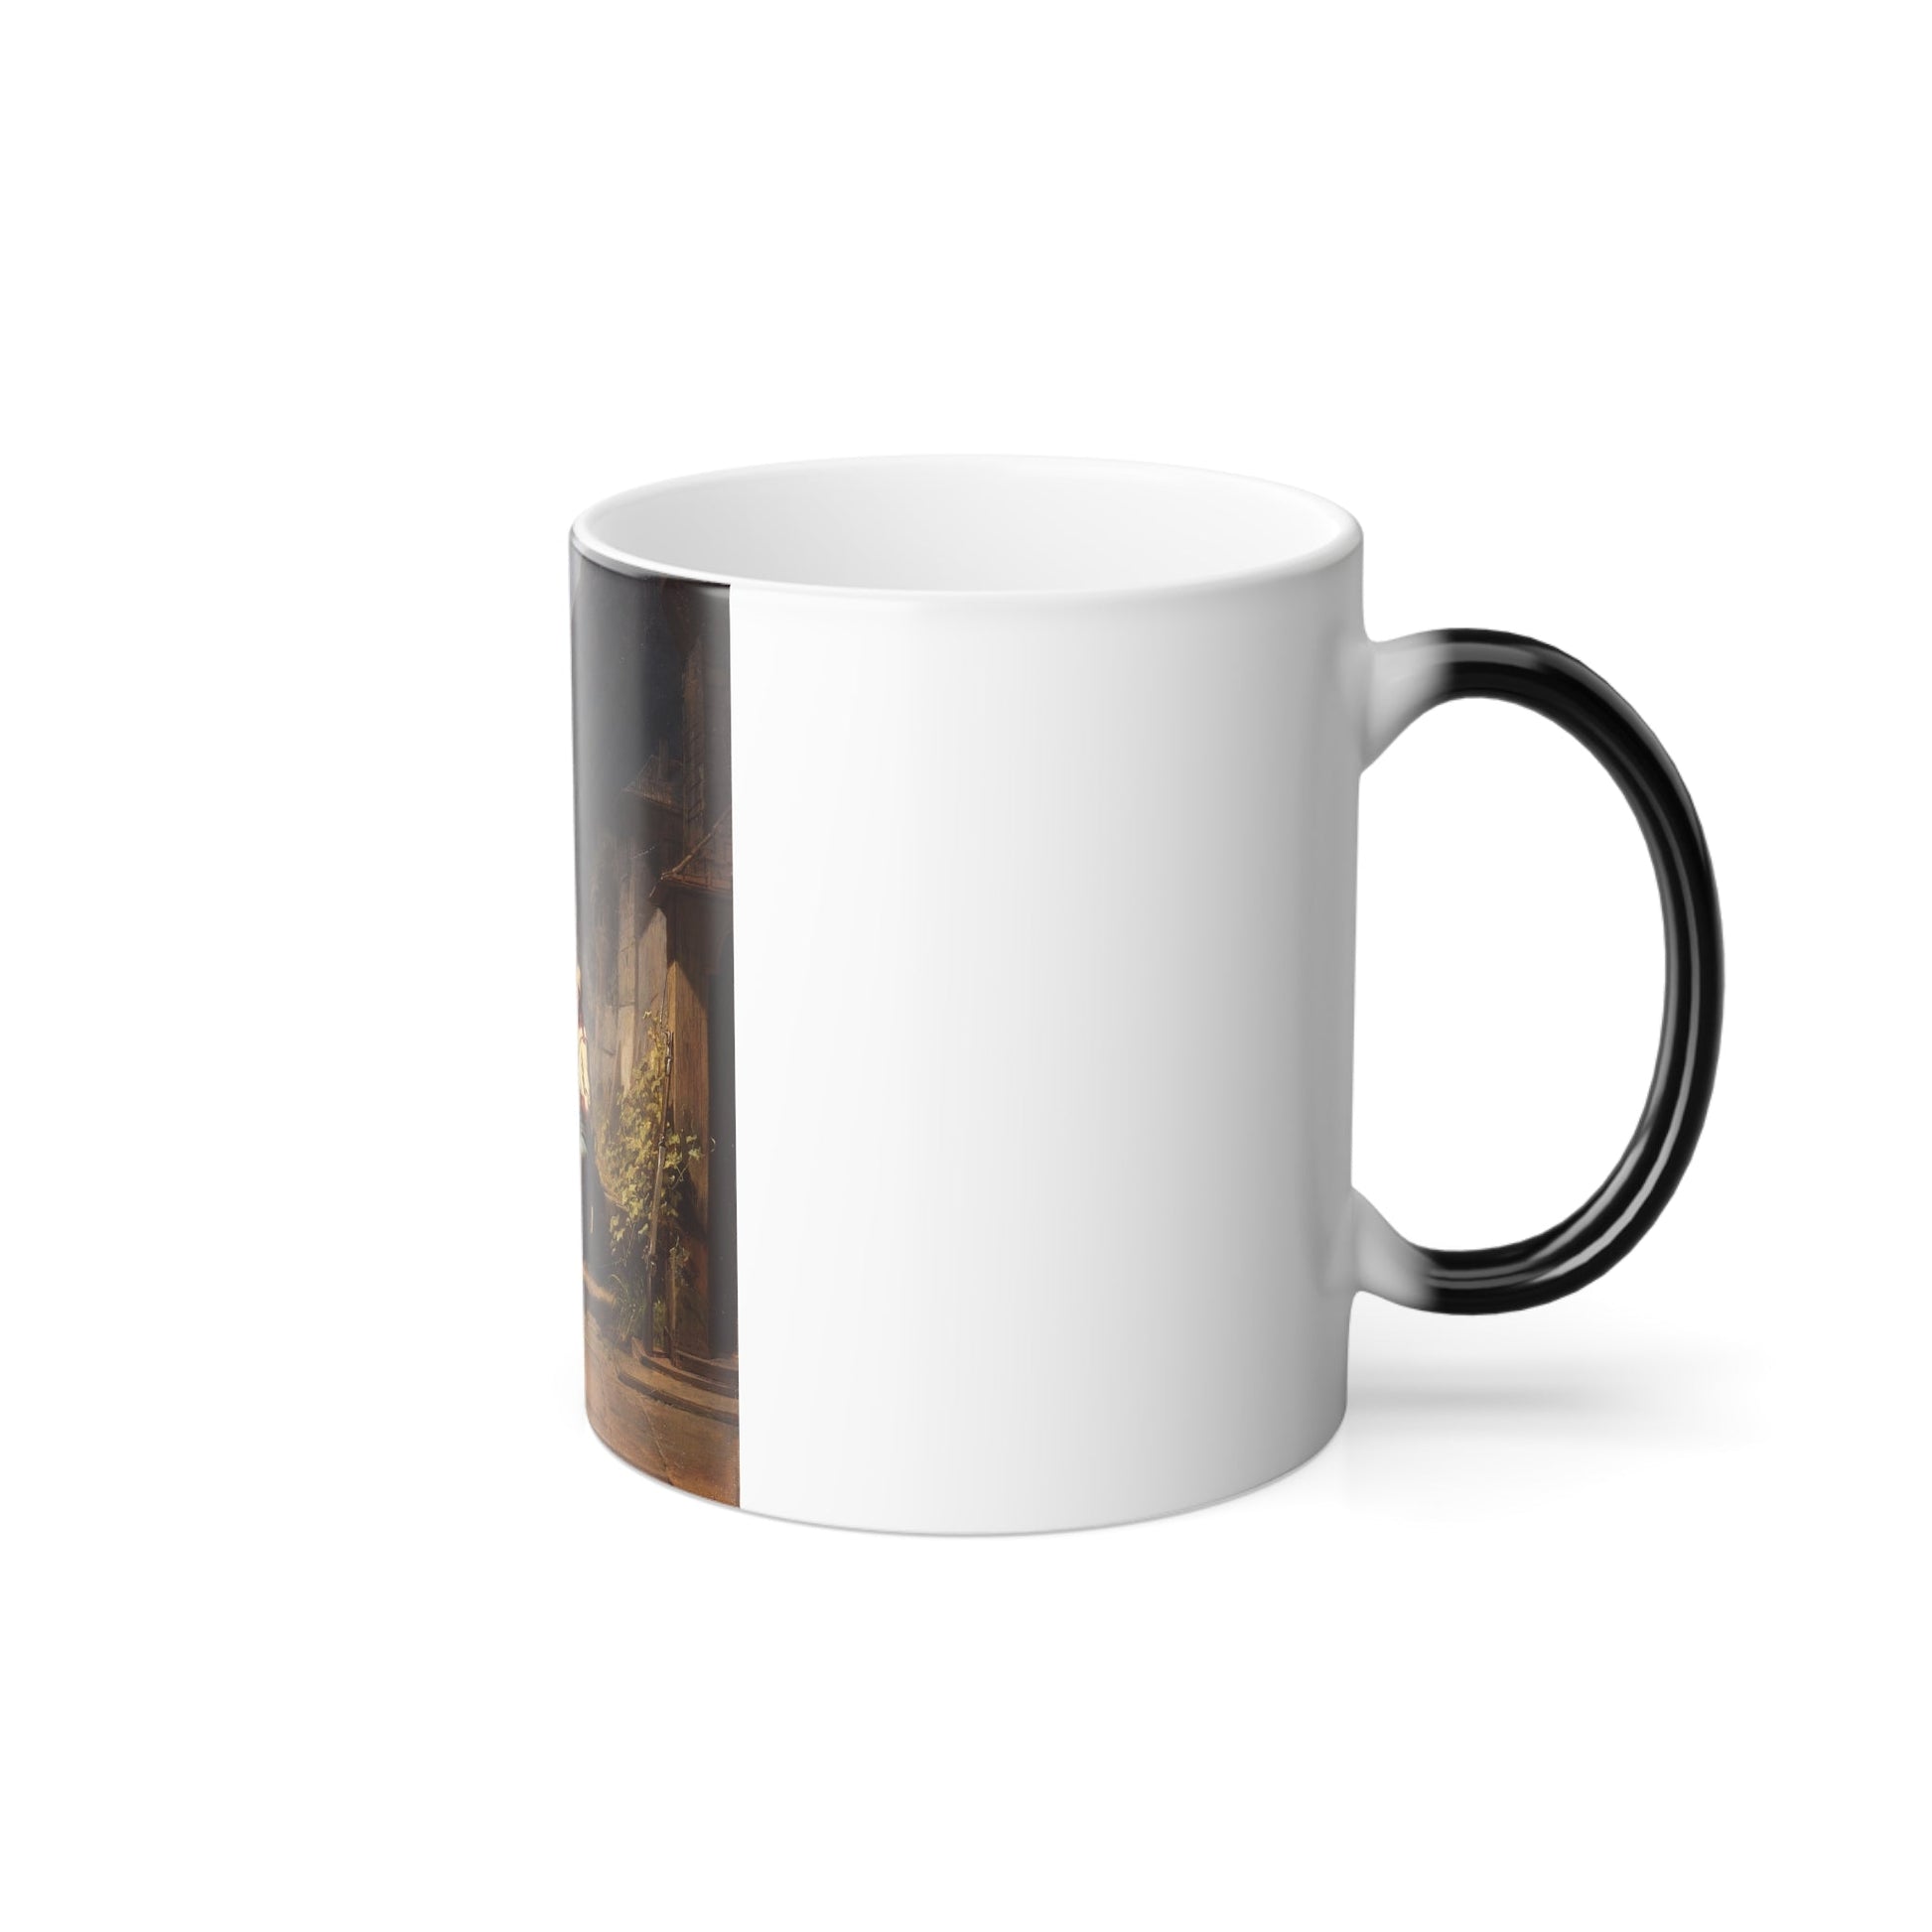 Carl Spitzweg (1808-1885) Sentry on a fortress - 1860 - Color Changing Mug 11oz-11oz-The Sticker Space